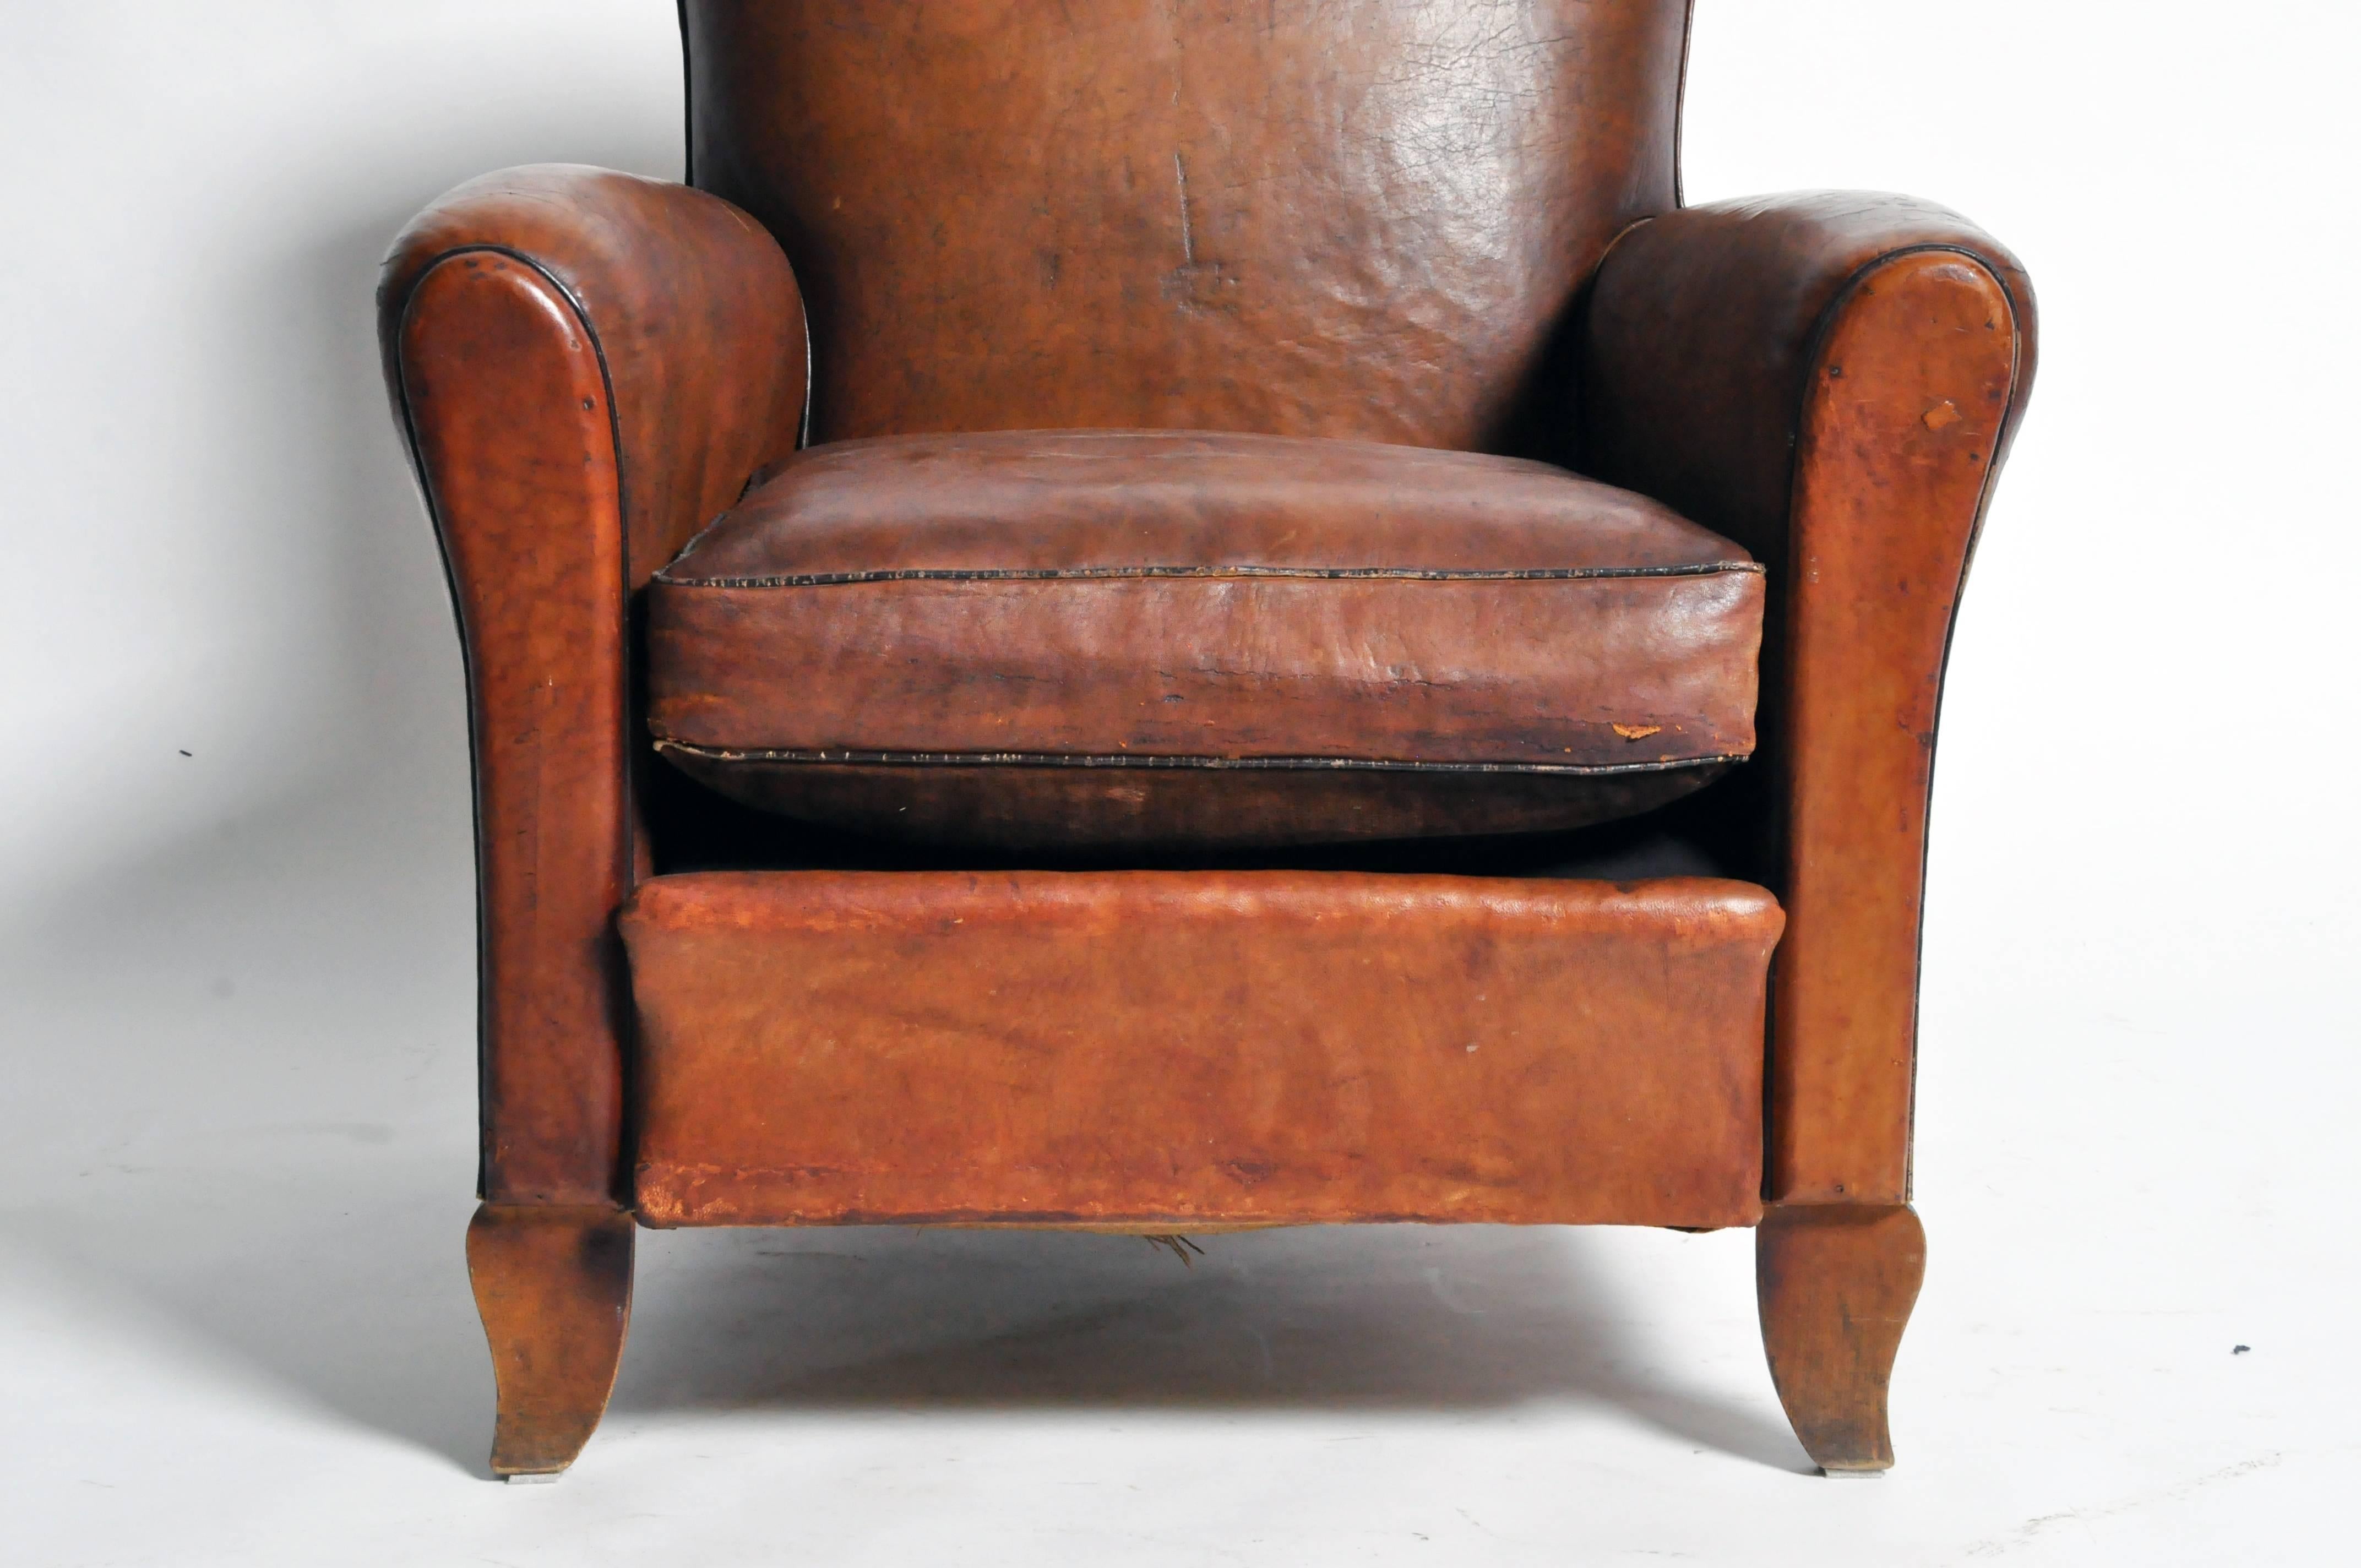 French Art Deco Leather Club Chair with Piping and Original Patina 2